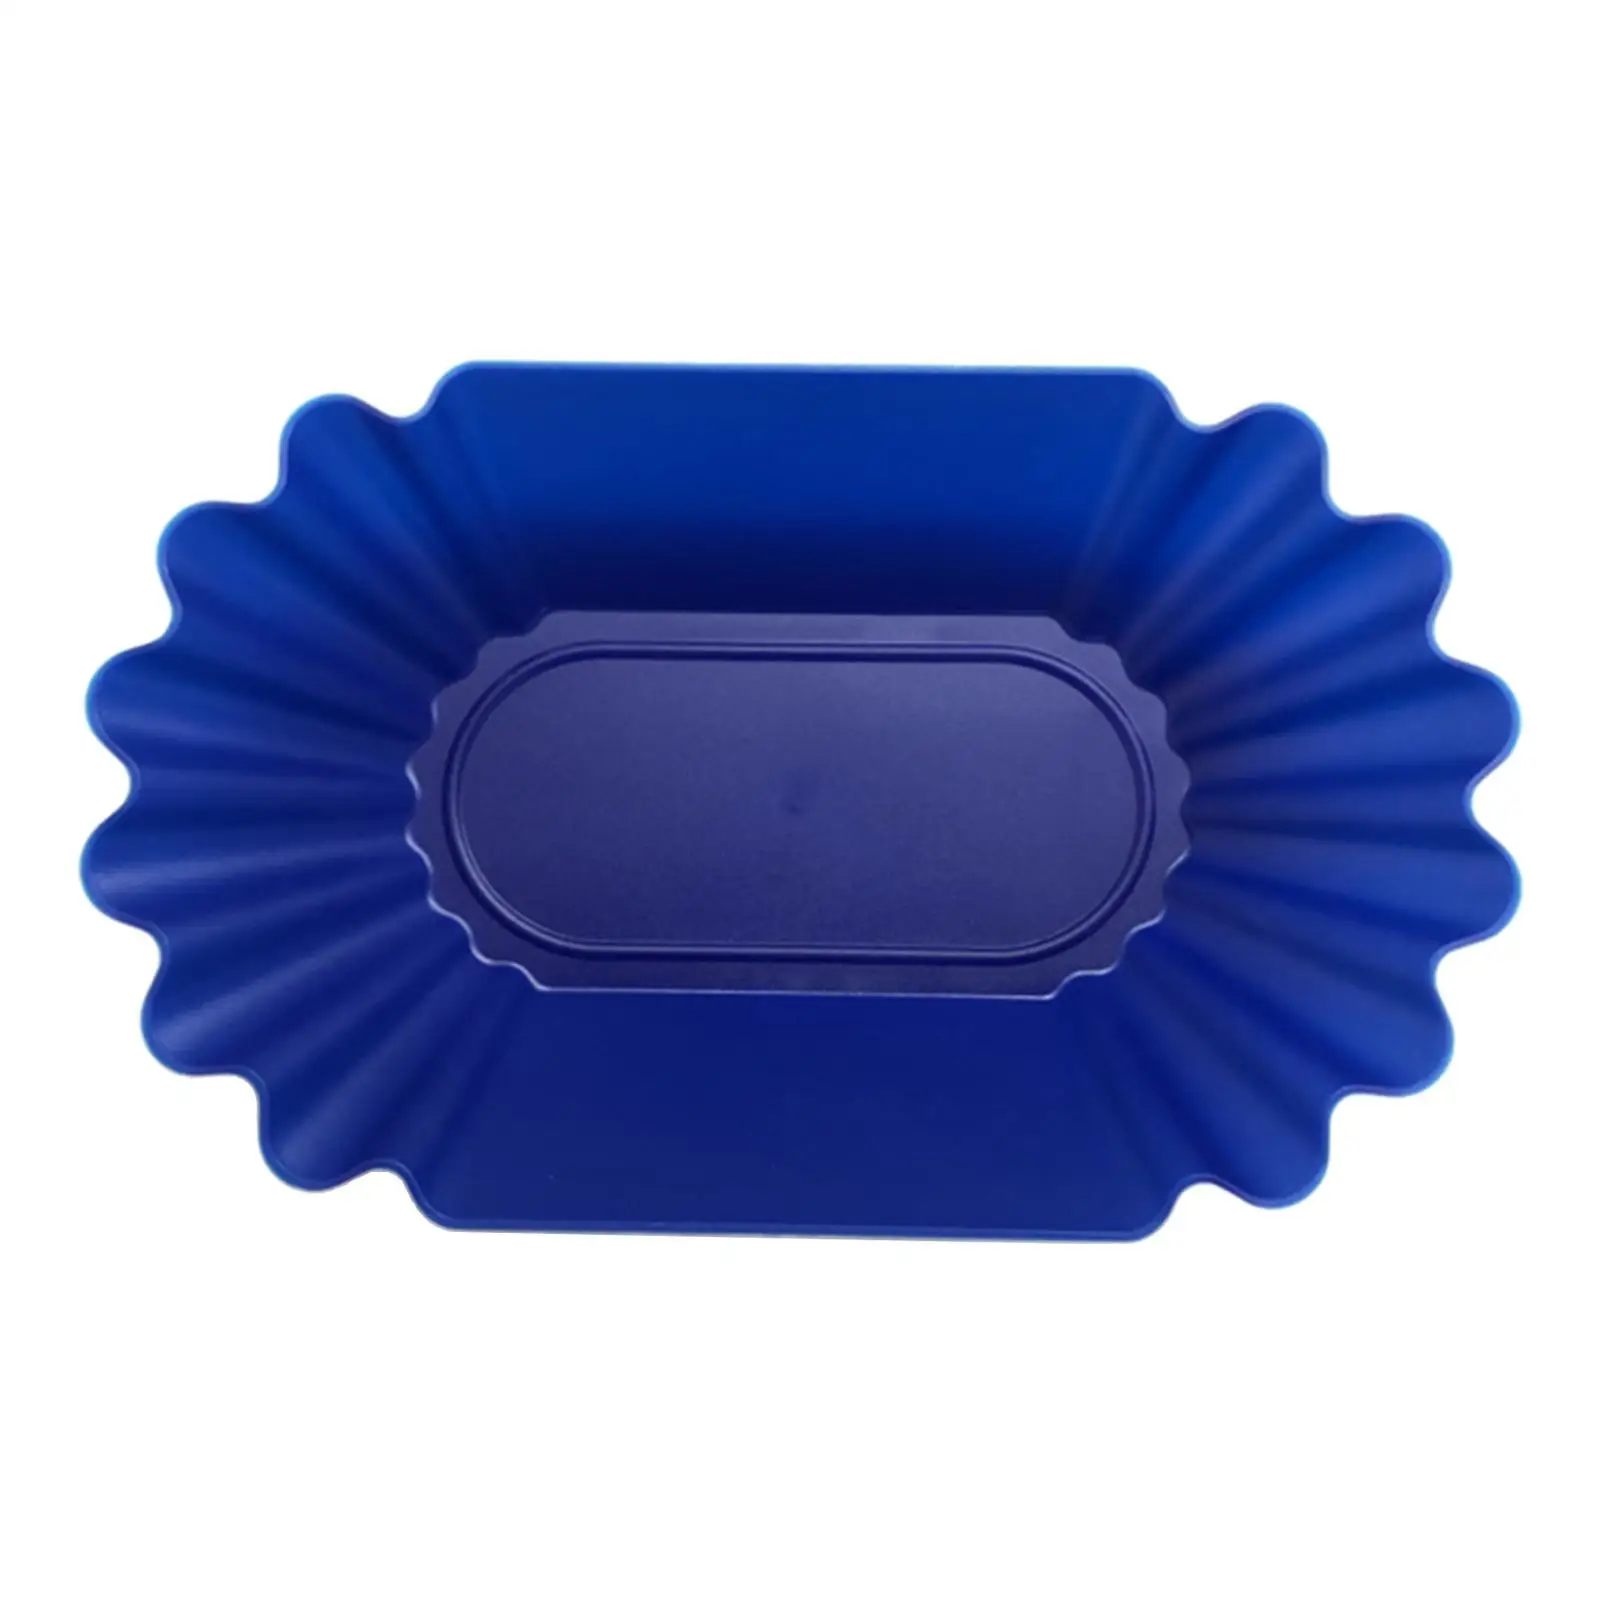 Plastic Small Serving Tray for Coffee Bean, Dessert, Candy, Snack - 4 Colors to Choose